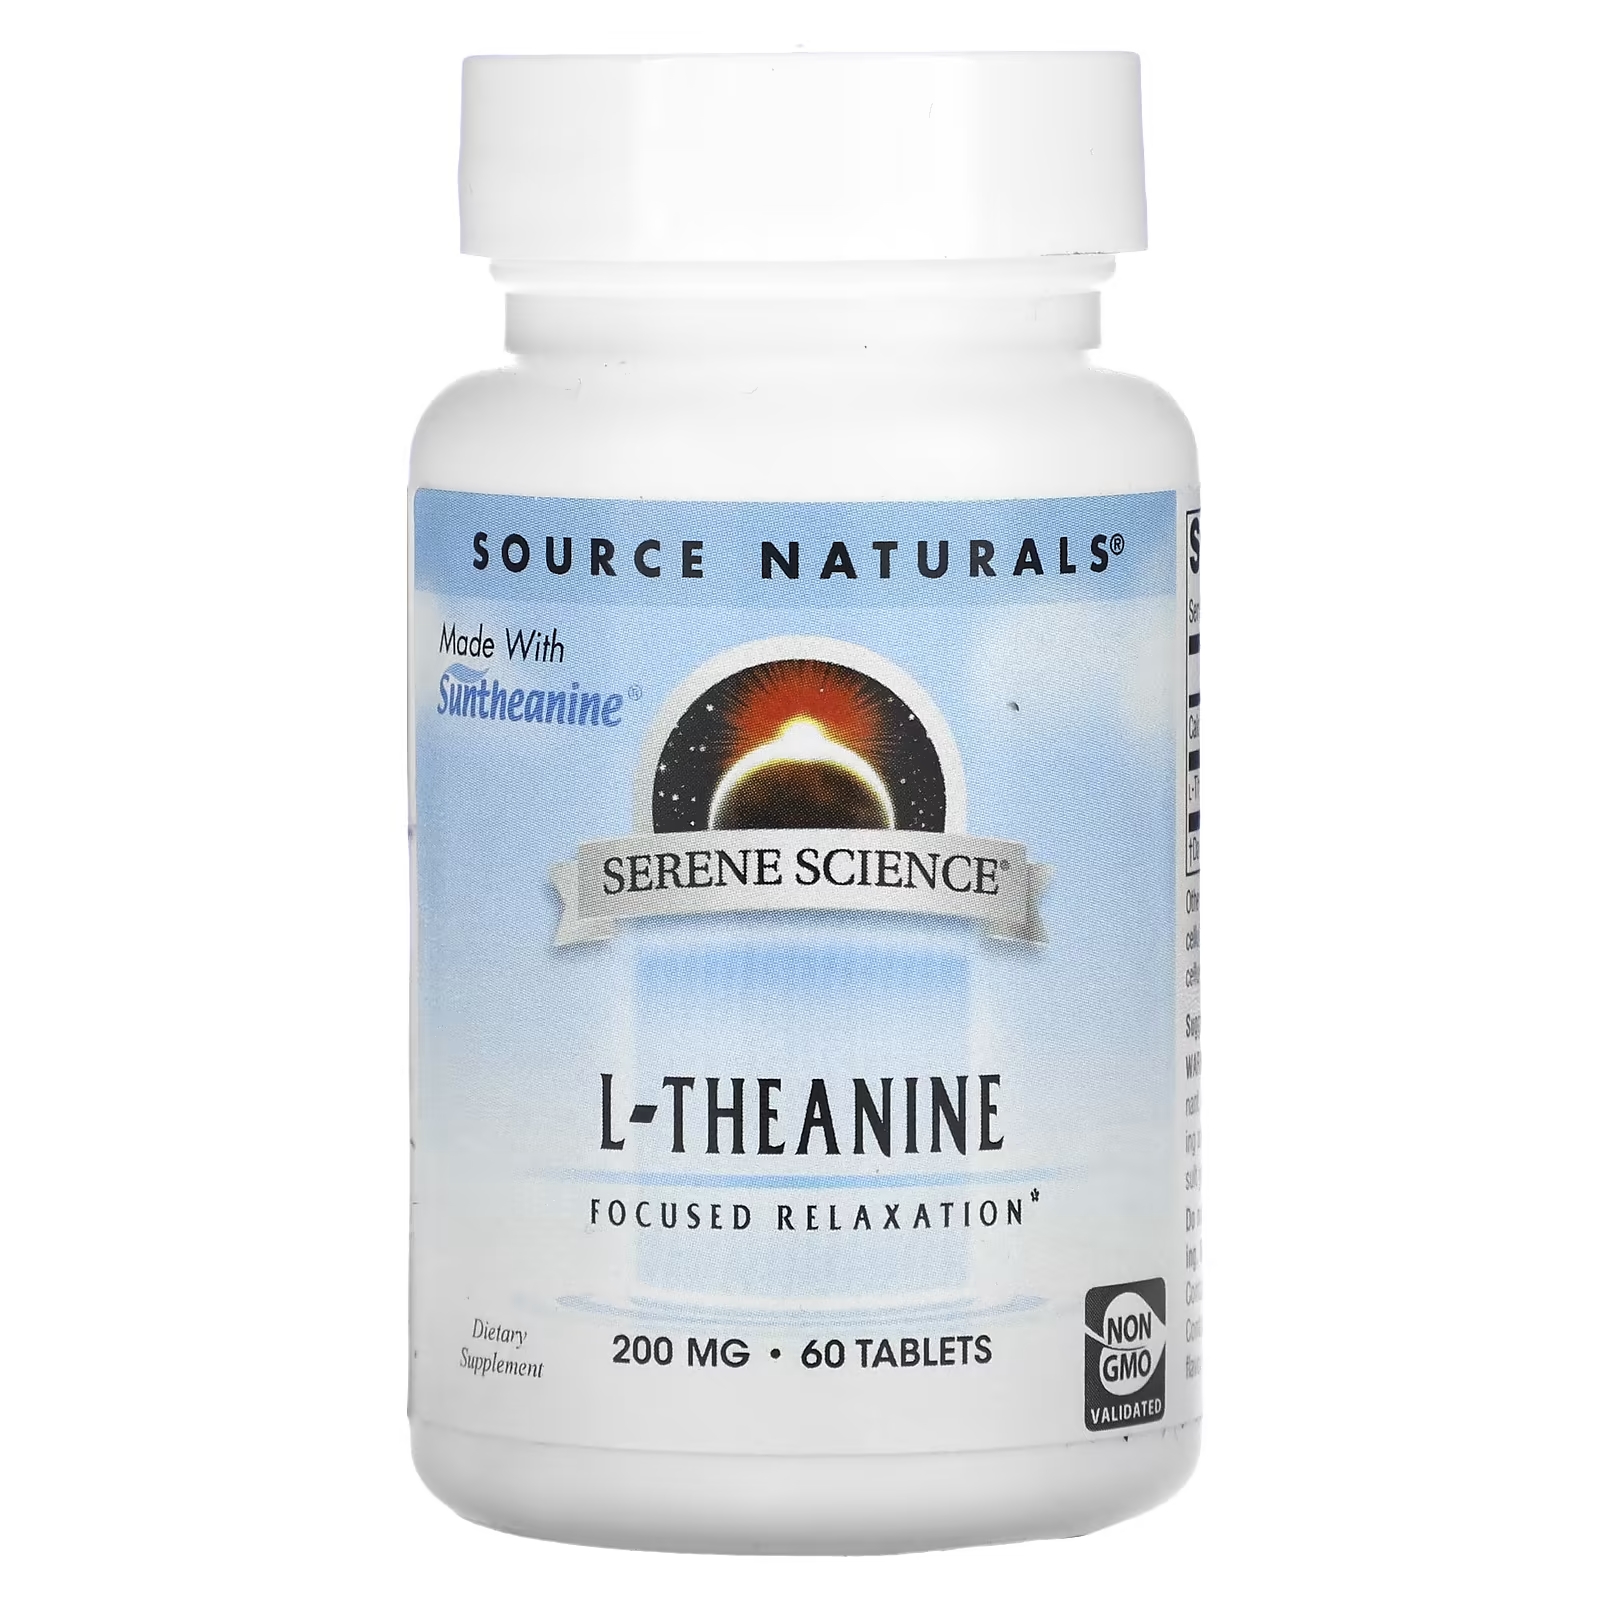 Source Naturals L-теанин 200 мг, 60 таблеток source naturals serene science l теанин 200 мг 60 капсул